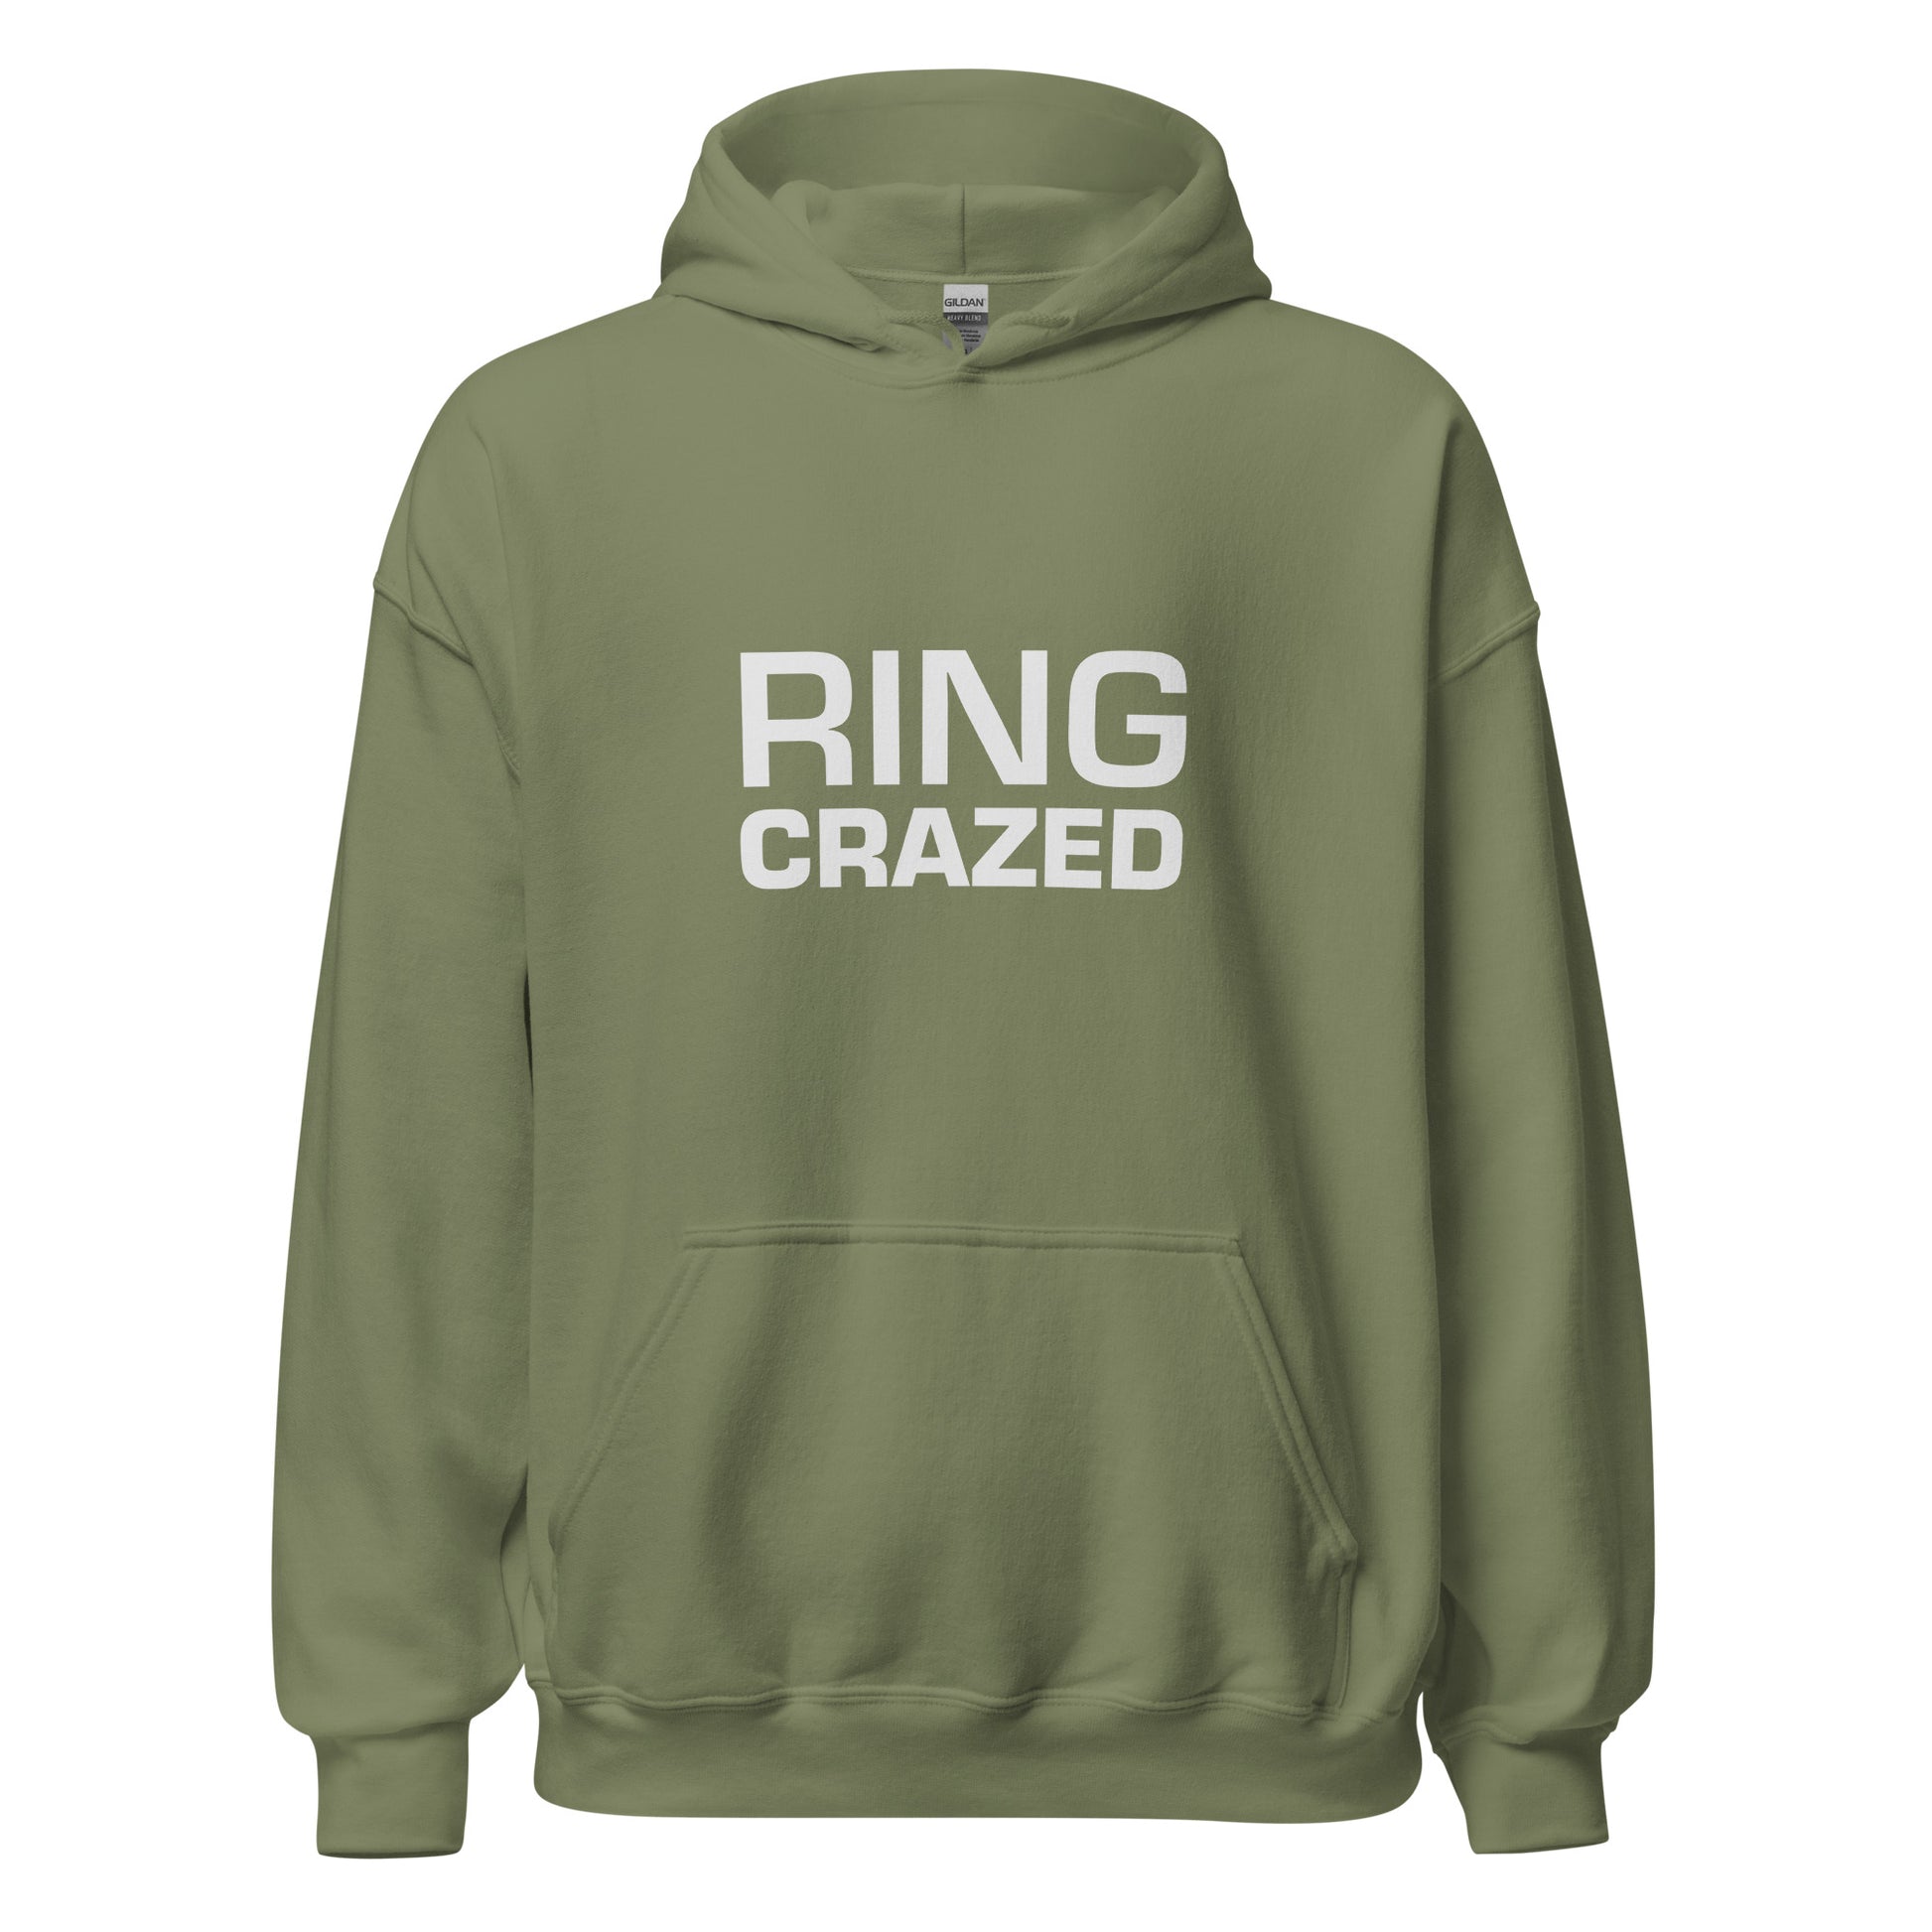 Ring Crazed wrestling and boxing hoodies are for boxers, wrestlers, and fans who go crazy for the sports and can't get enough of the action.